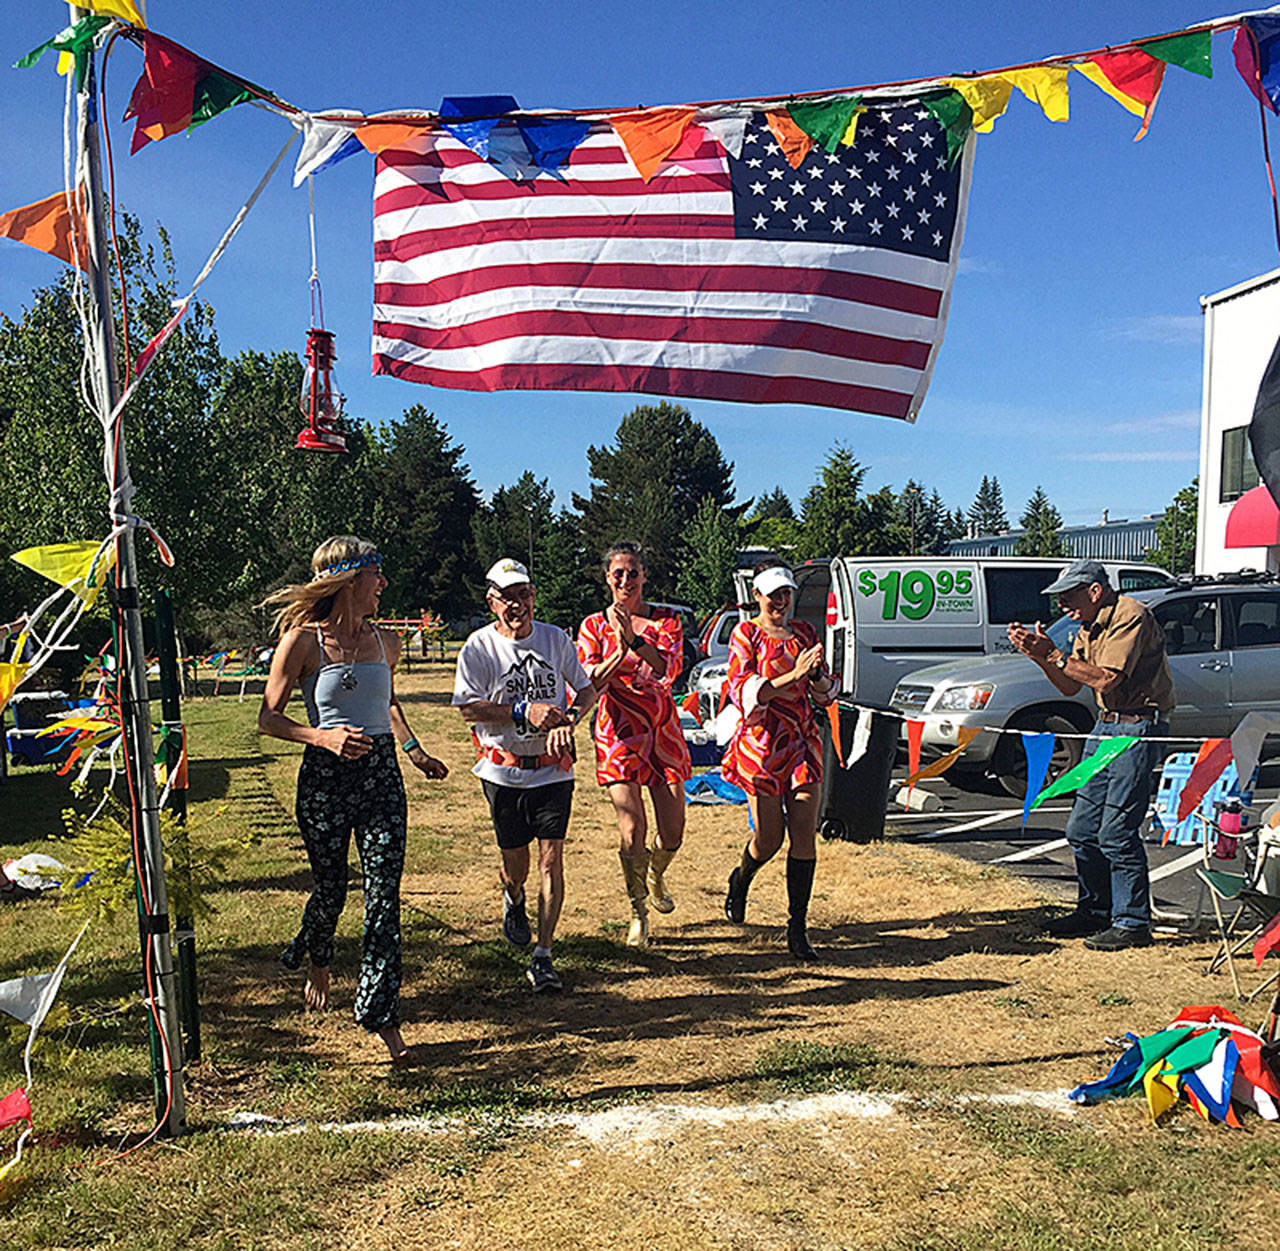 Bob Norton and The Dancing Queens at the finish line. (Courtesy Photo)